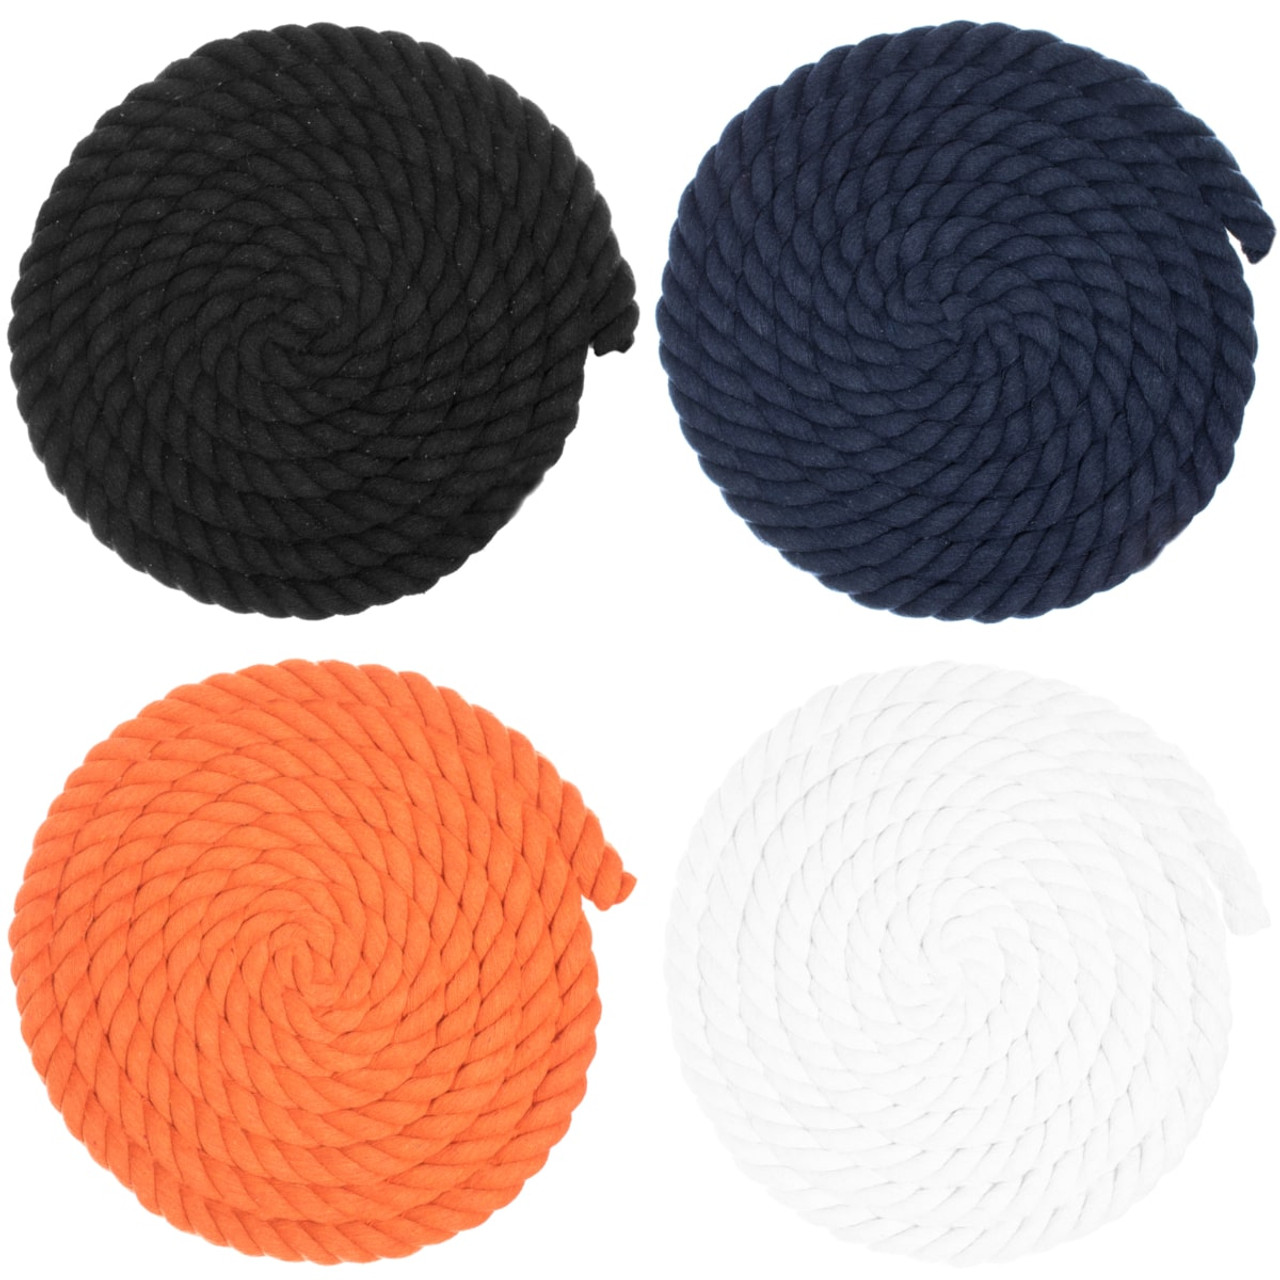 3/4 inch Twisted Polypropylene Rope - Multiple Lengths